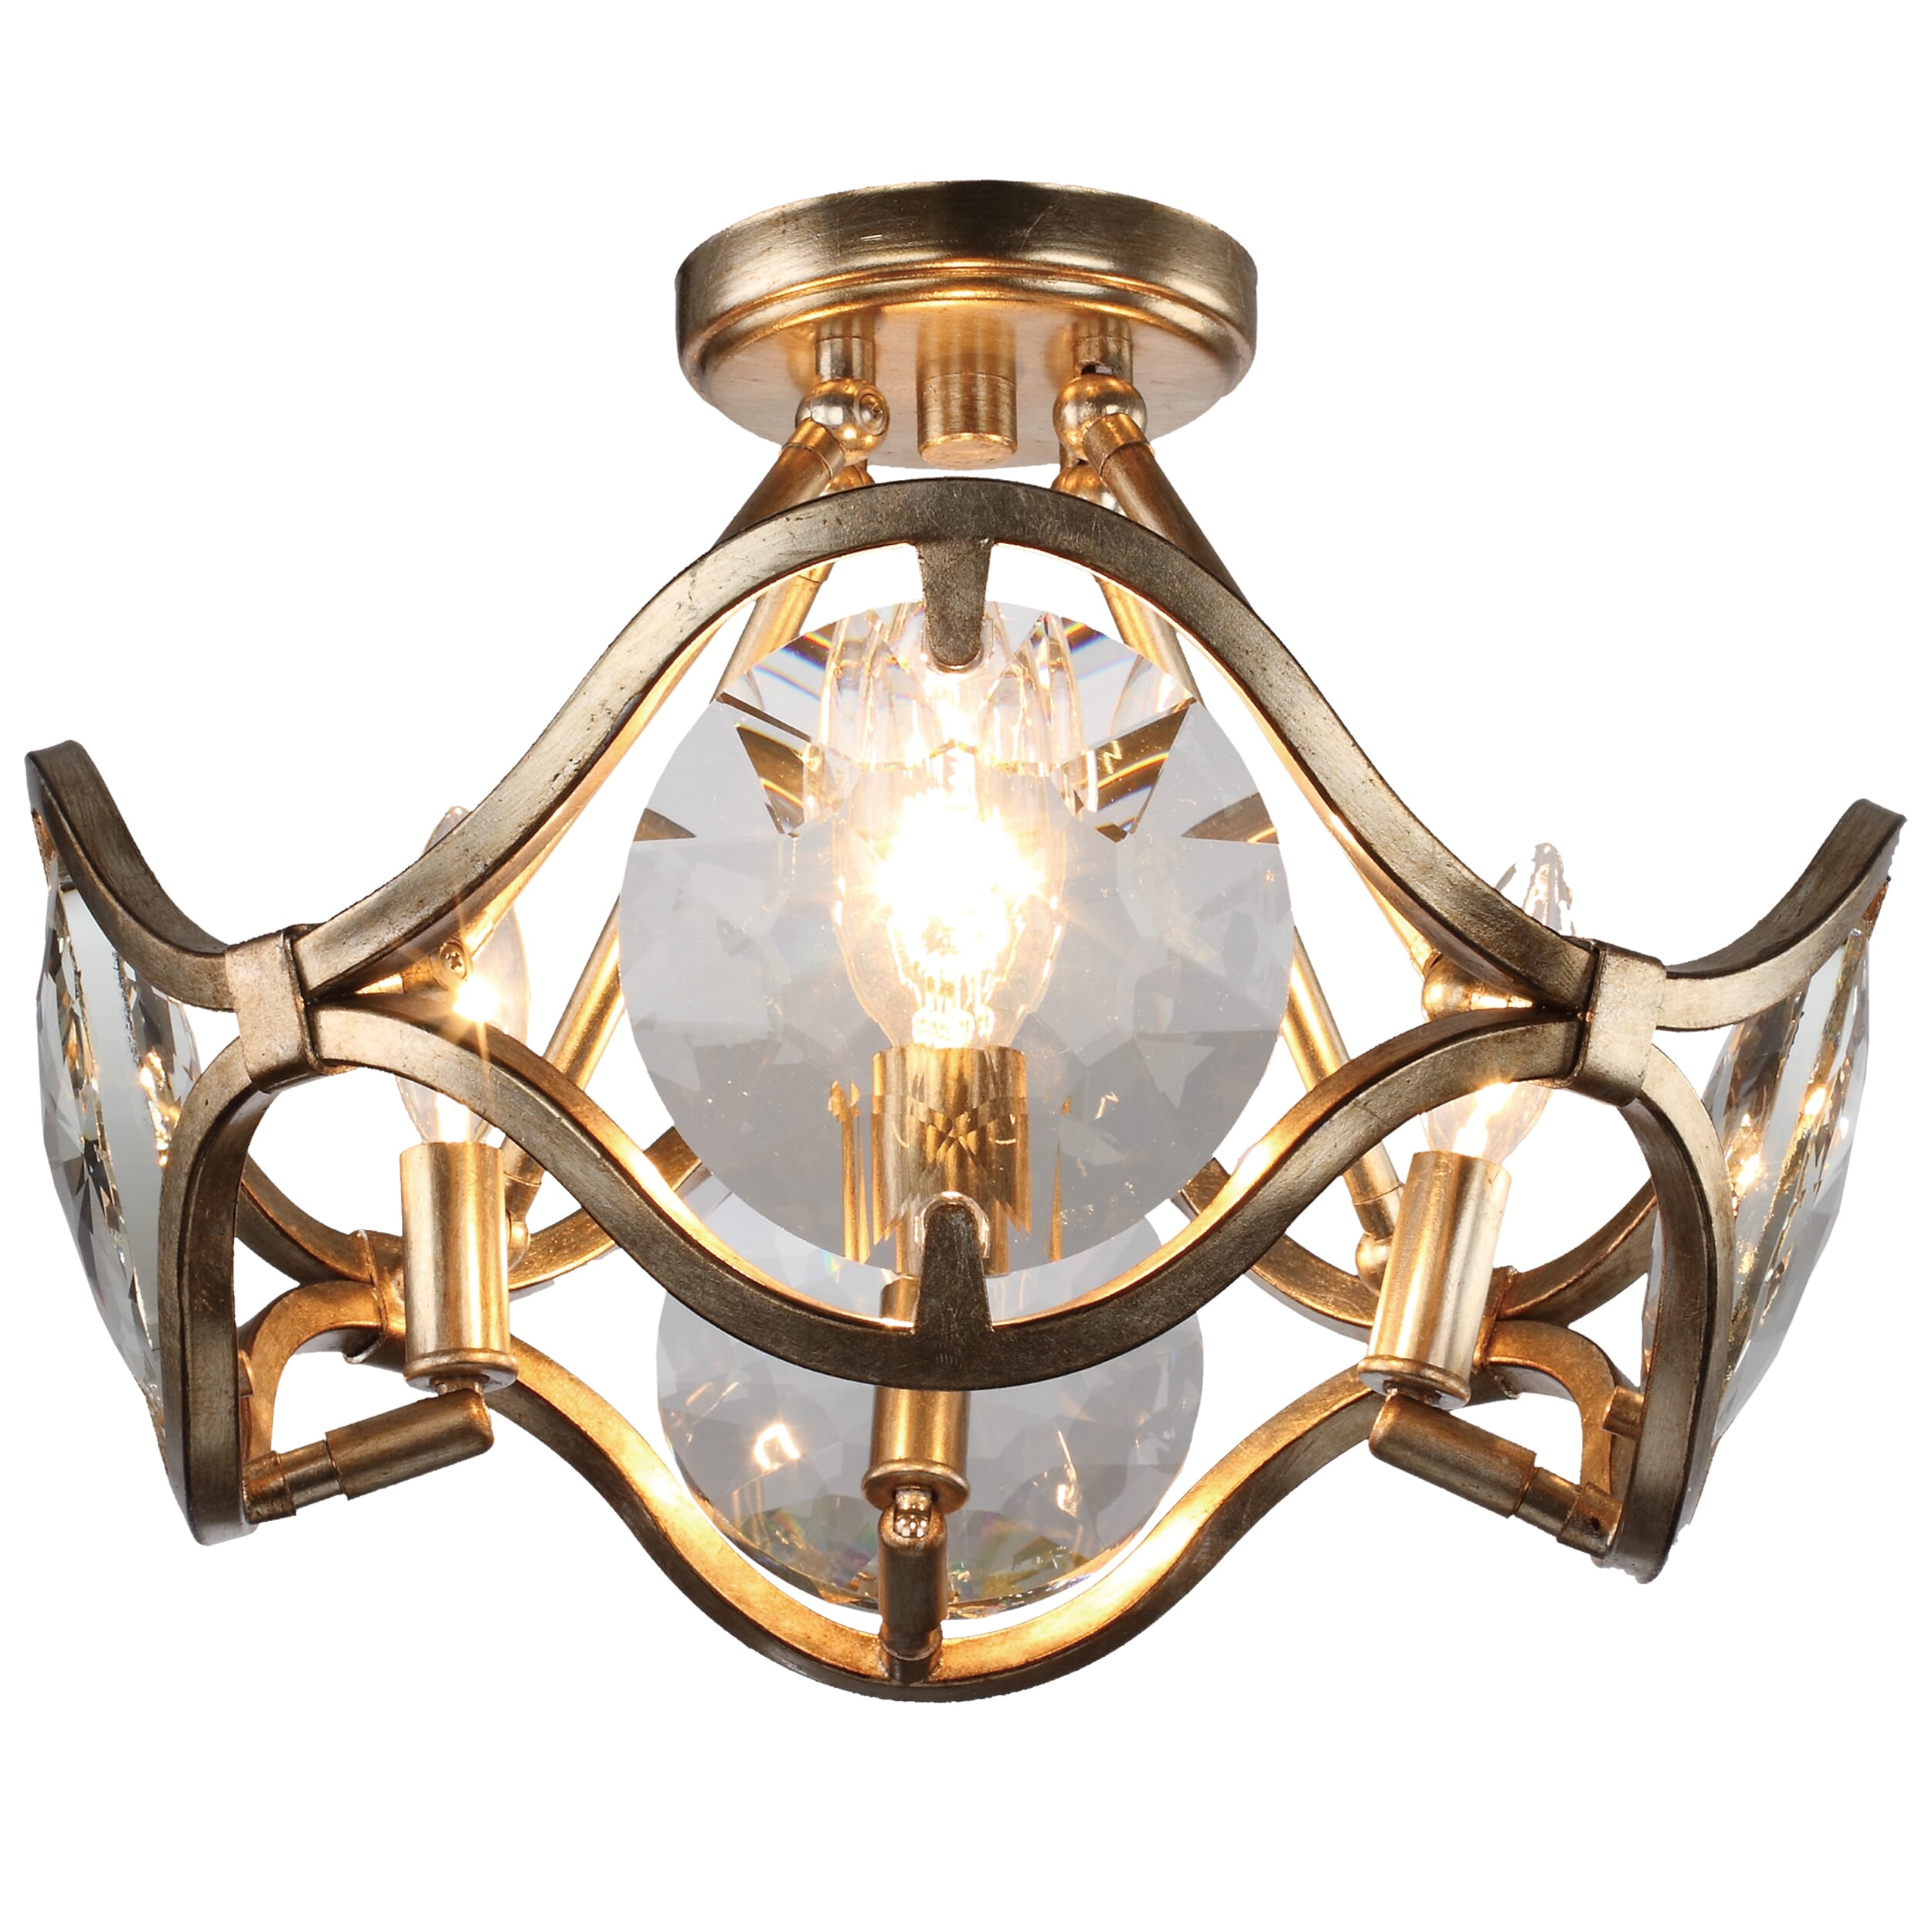 Crystorama Quincy 4-Light 16" Ceiling Light in Distressed Twilight